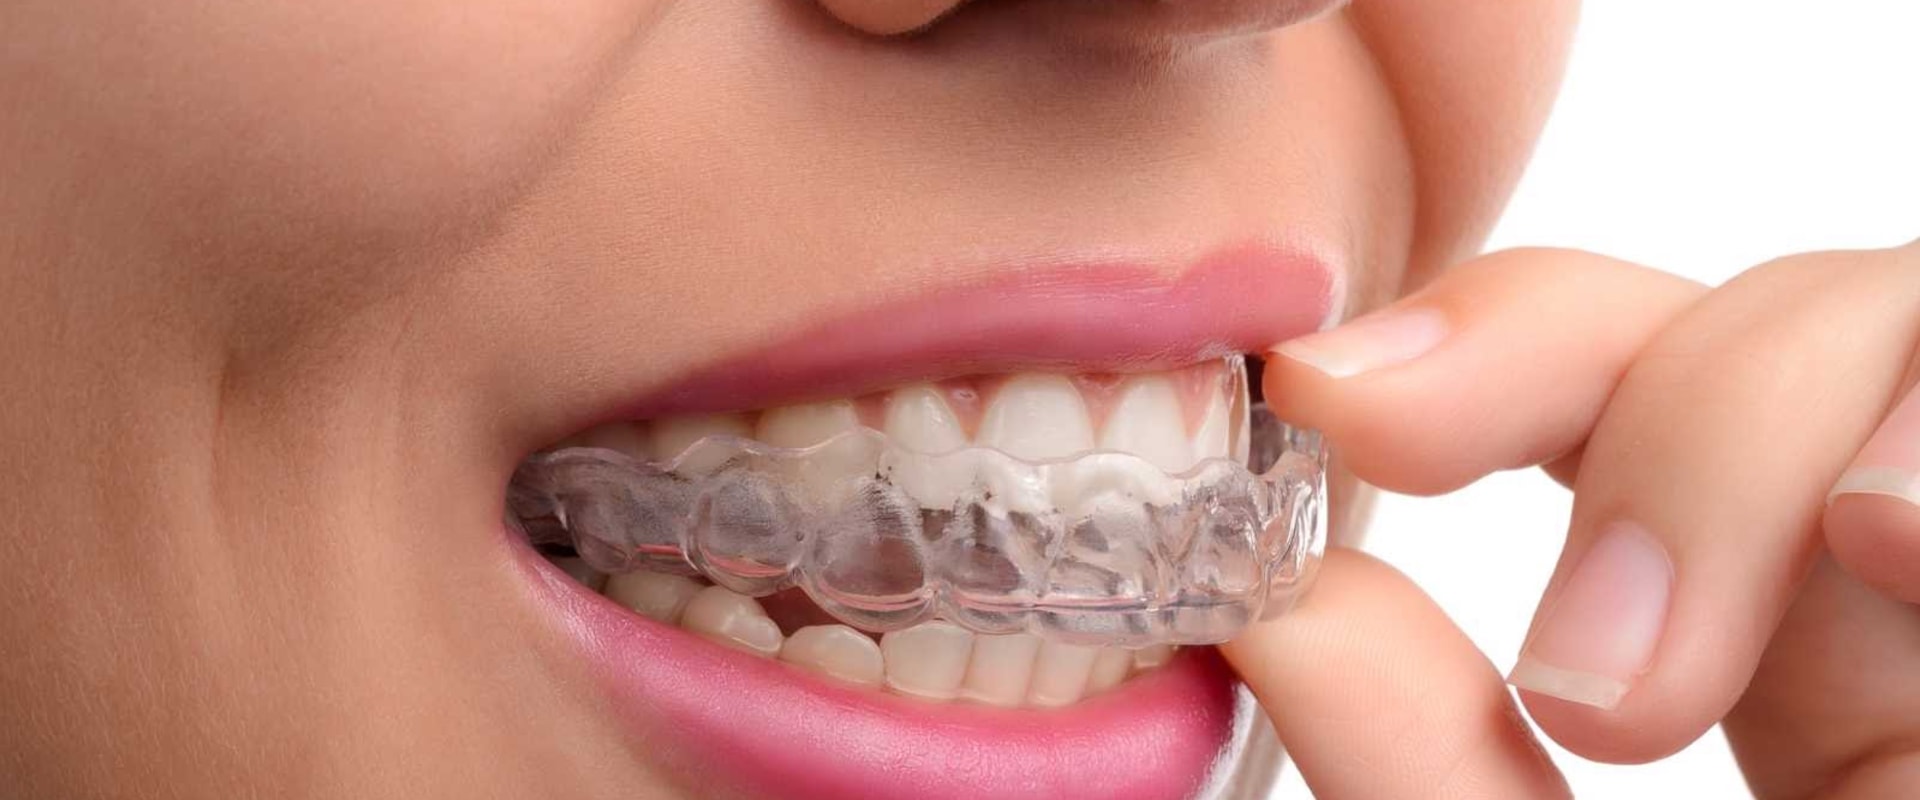 What Foods and Drinks Should I Avoid While Wearing Invisalign Aligners?